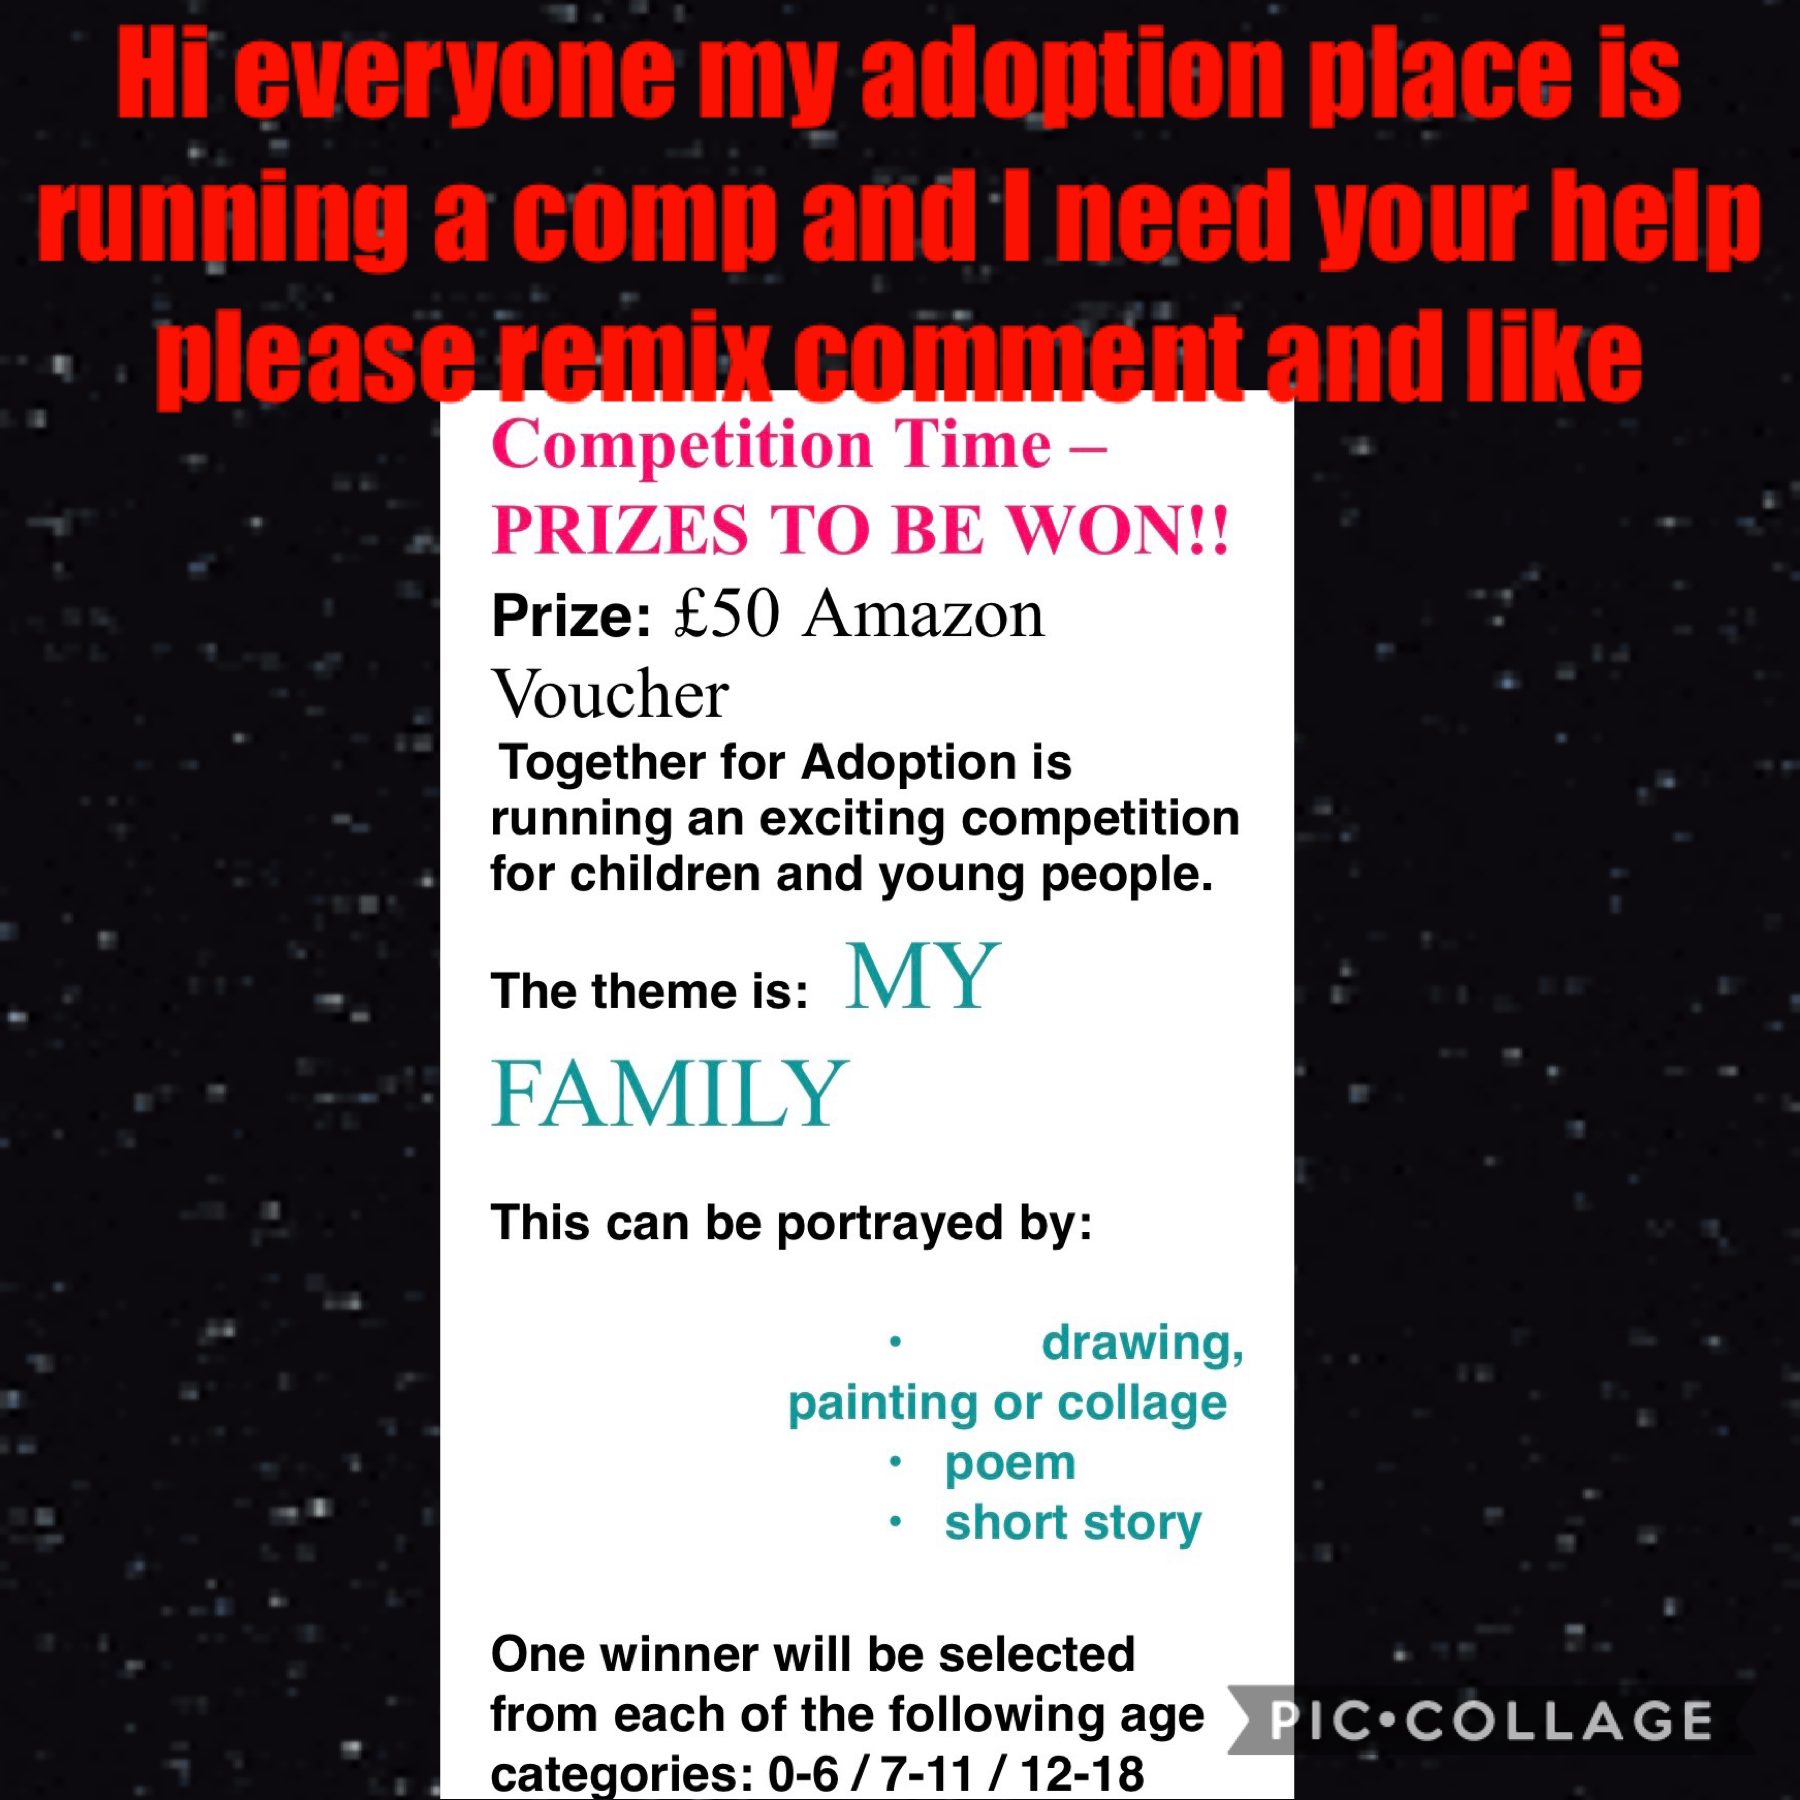 Please help me guys I really want to win this and give it to my mum